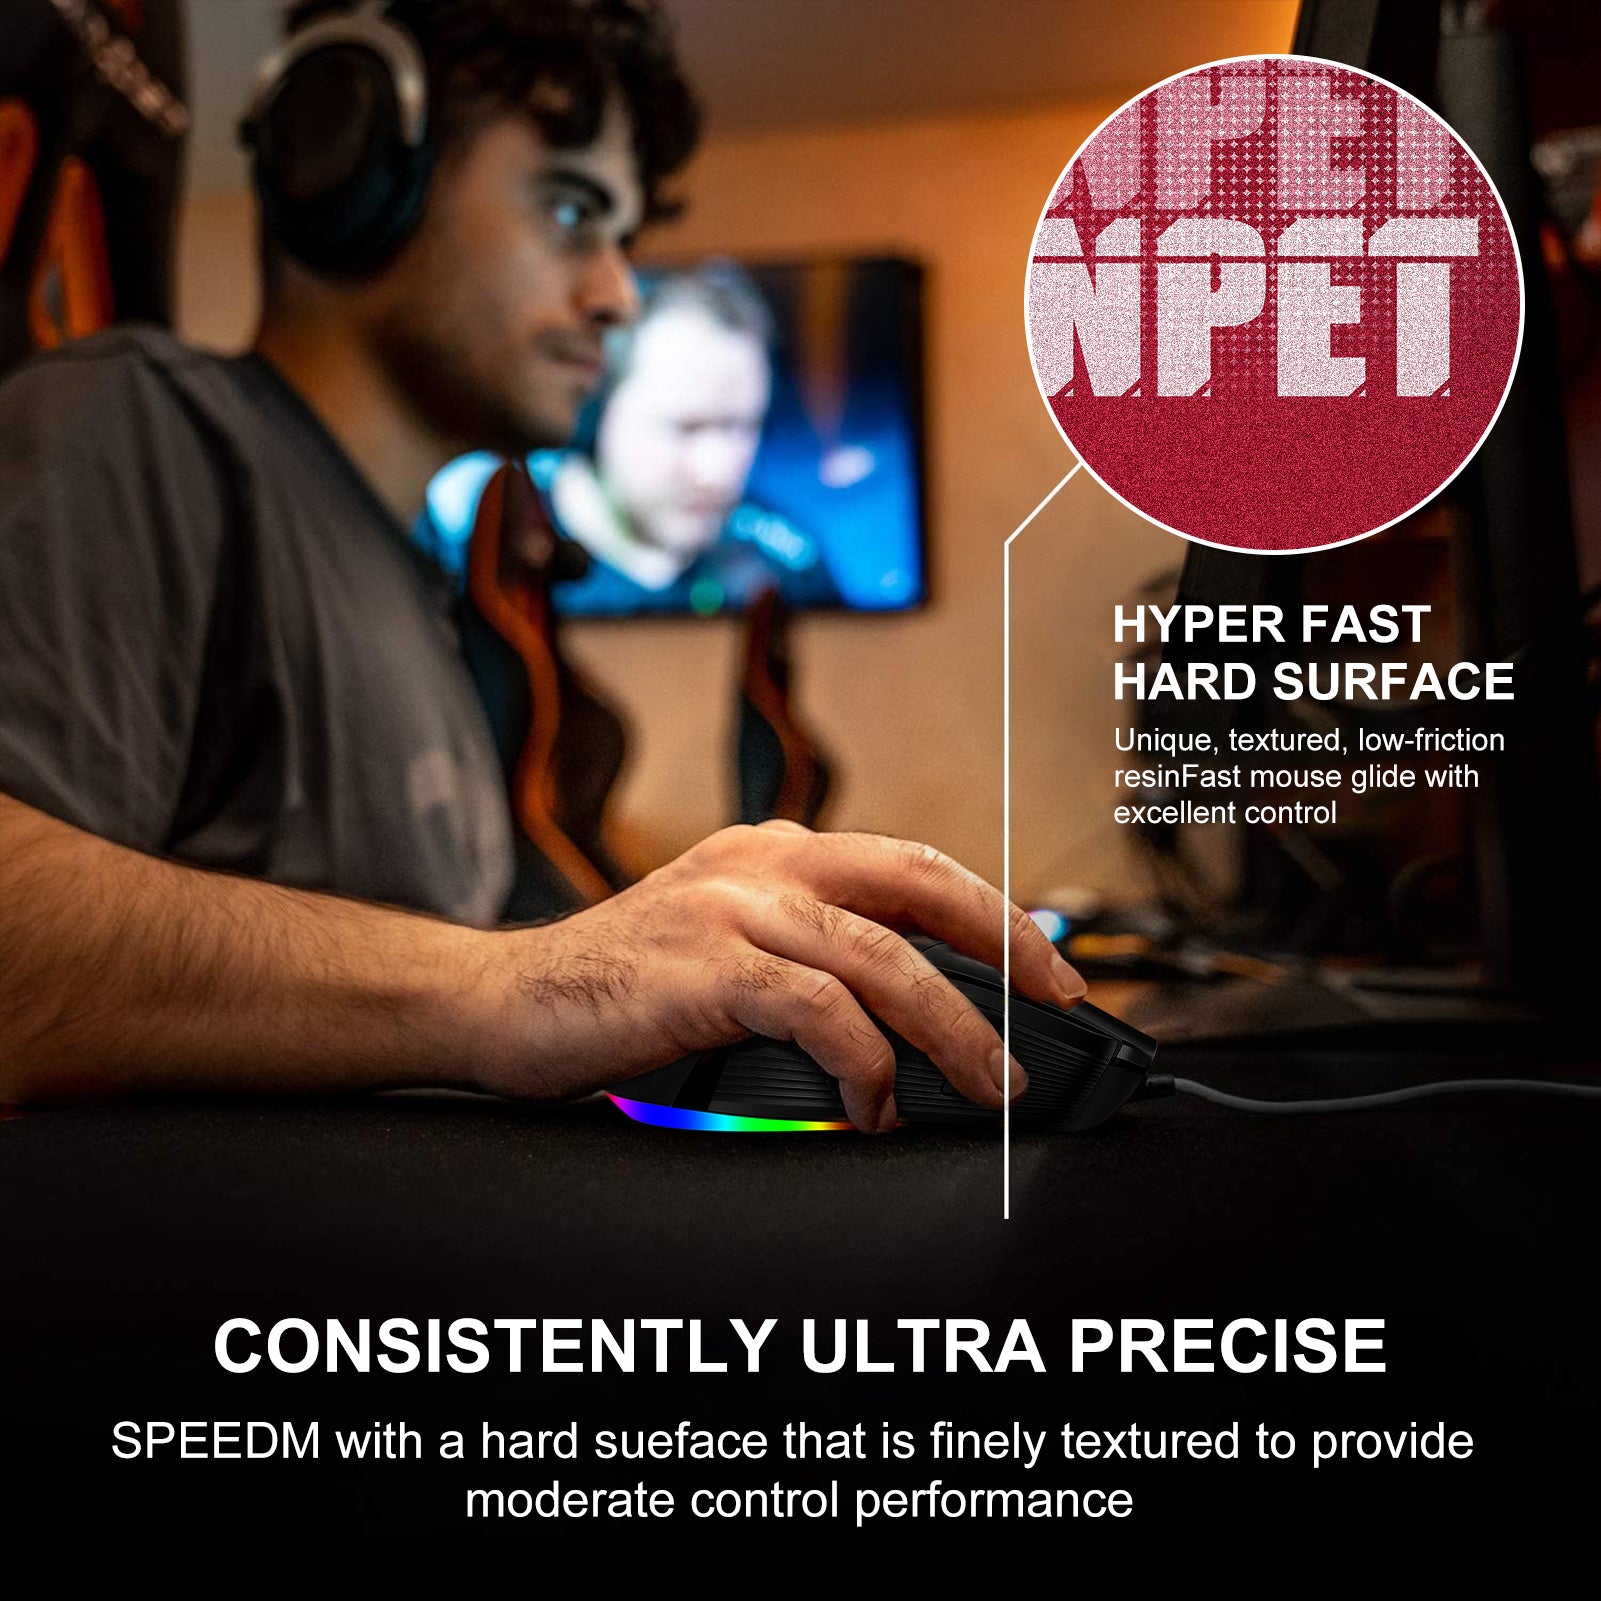 NPET SPEEDM Gaming Mousepad - Resin Surface Hard Gaming Mouse pad,Balanced Control & Speed, No Smell Waterproof Mouse Mat for Esports Gamers [Hard/Fast] Red-Rukia, Large